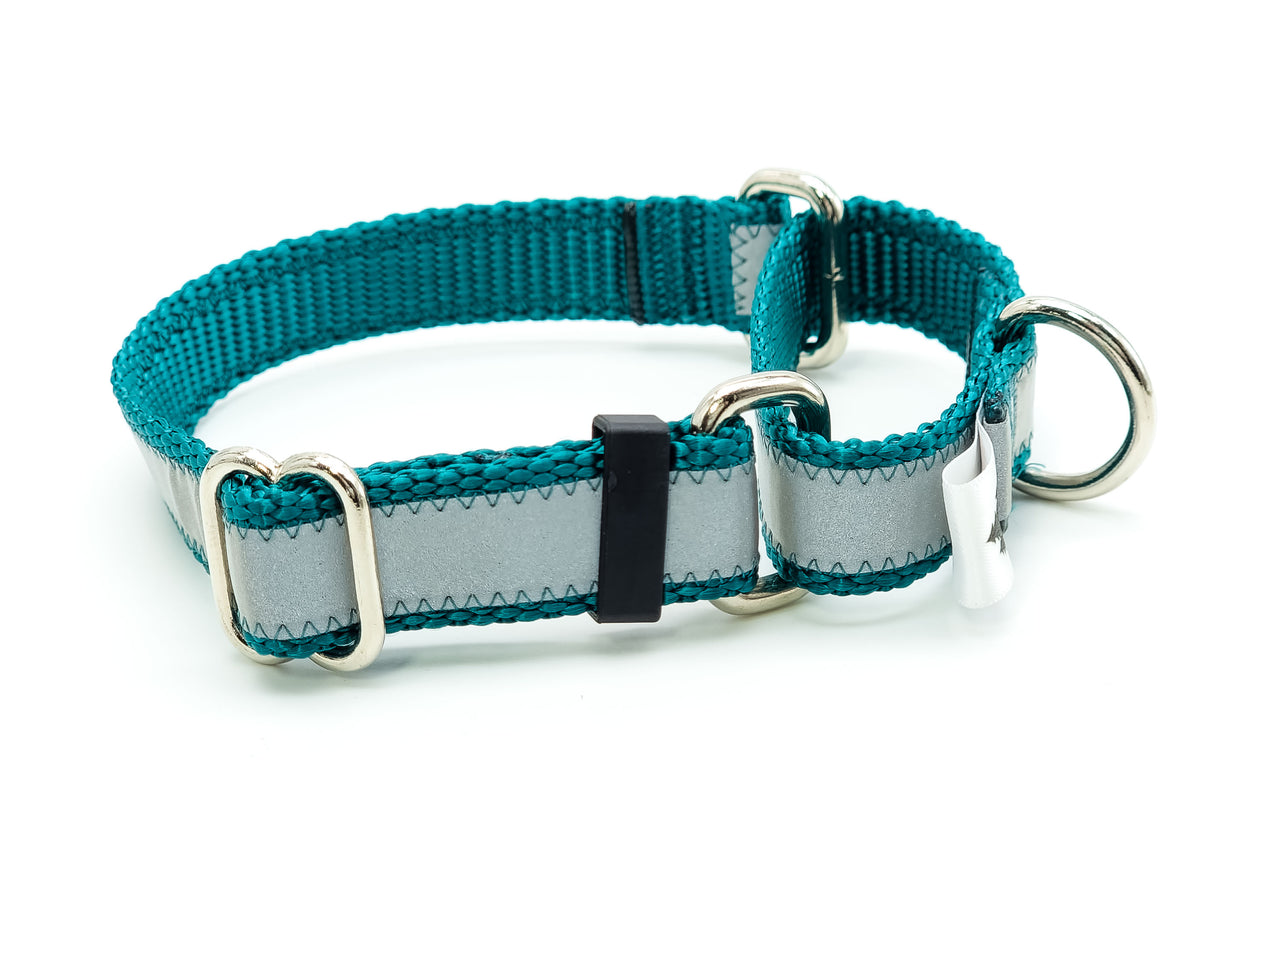 Teal Reflective Martingale - Small, Medium or XL